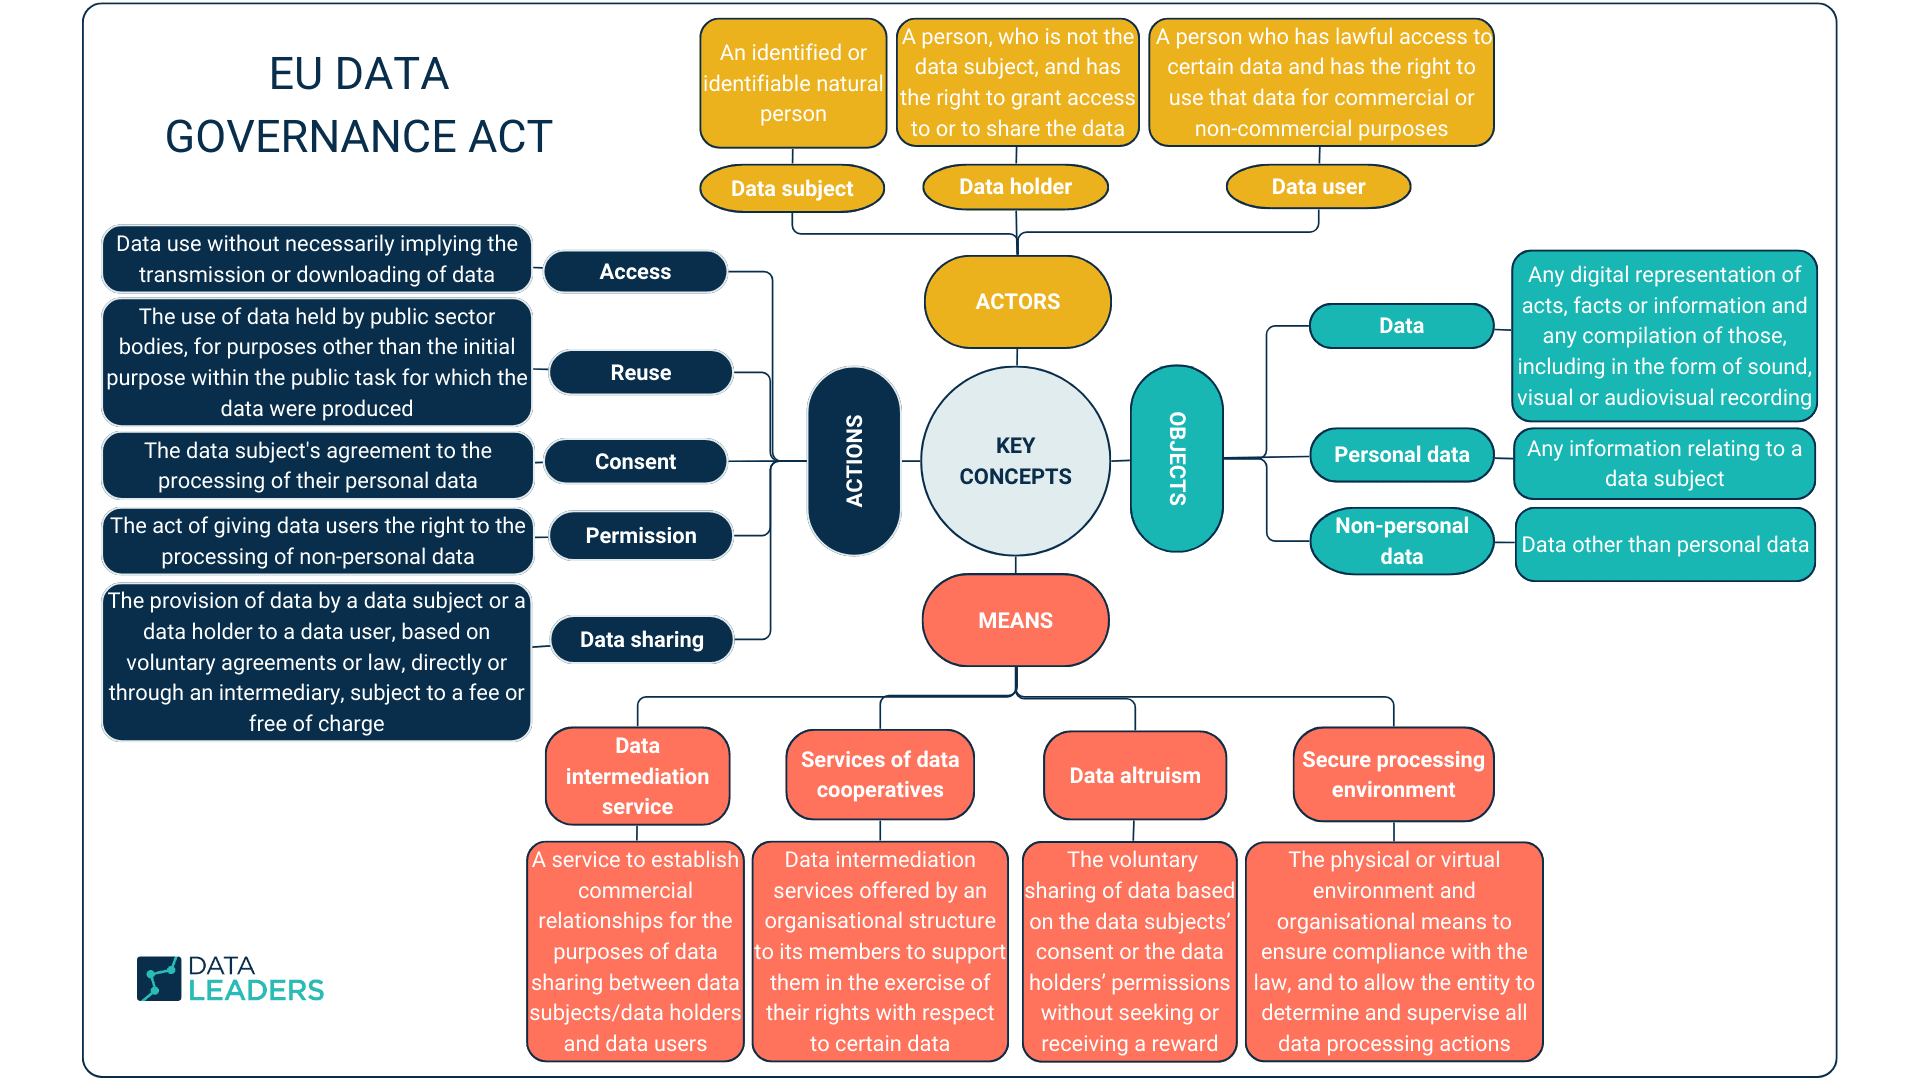 Four Key Concepts of the EU Data Governance Act: Actions, Actors, Objects, Means. Actors: